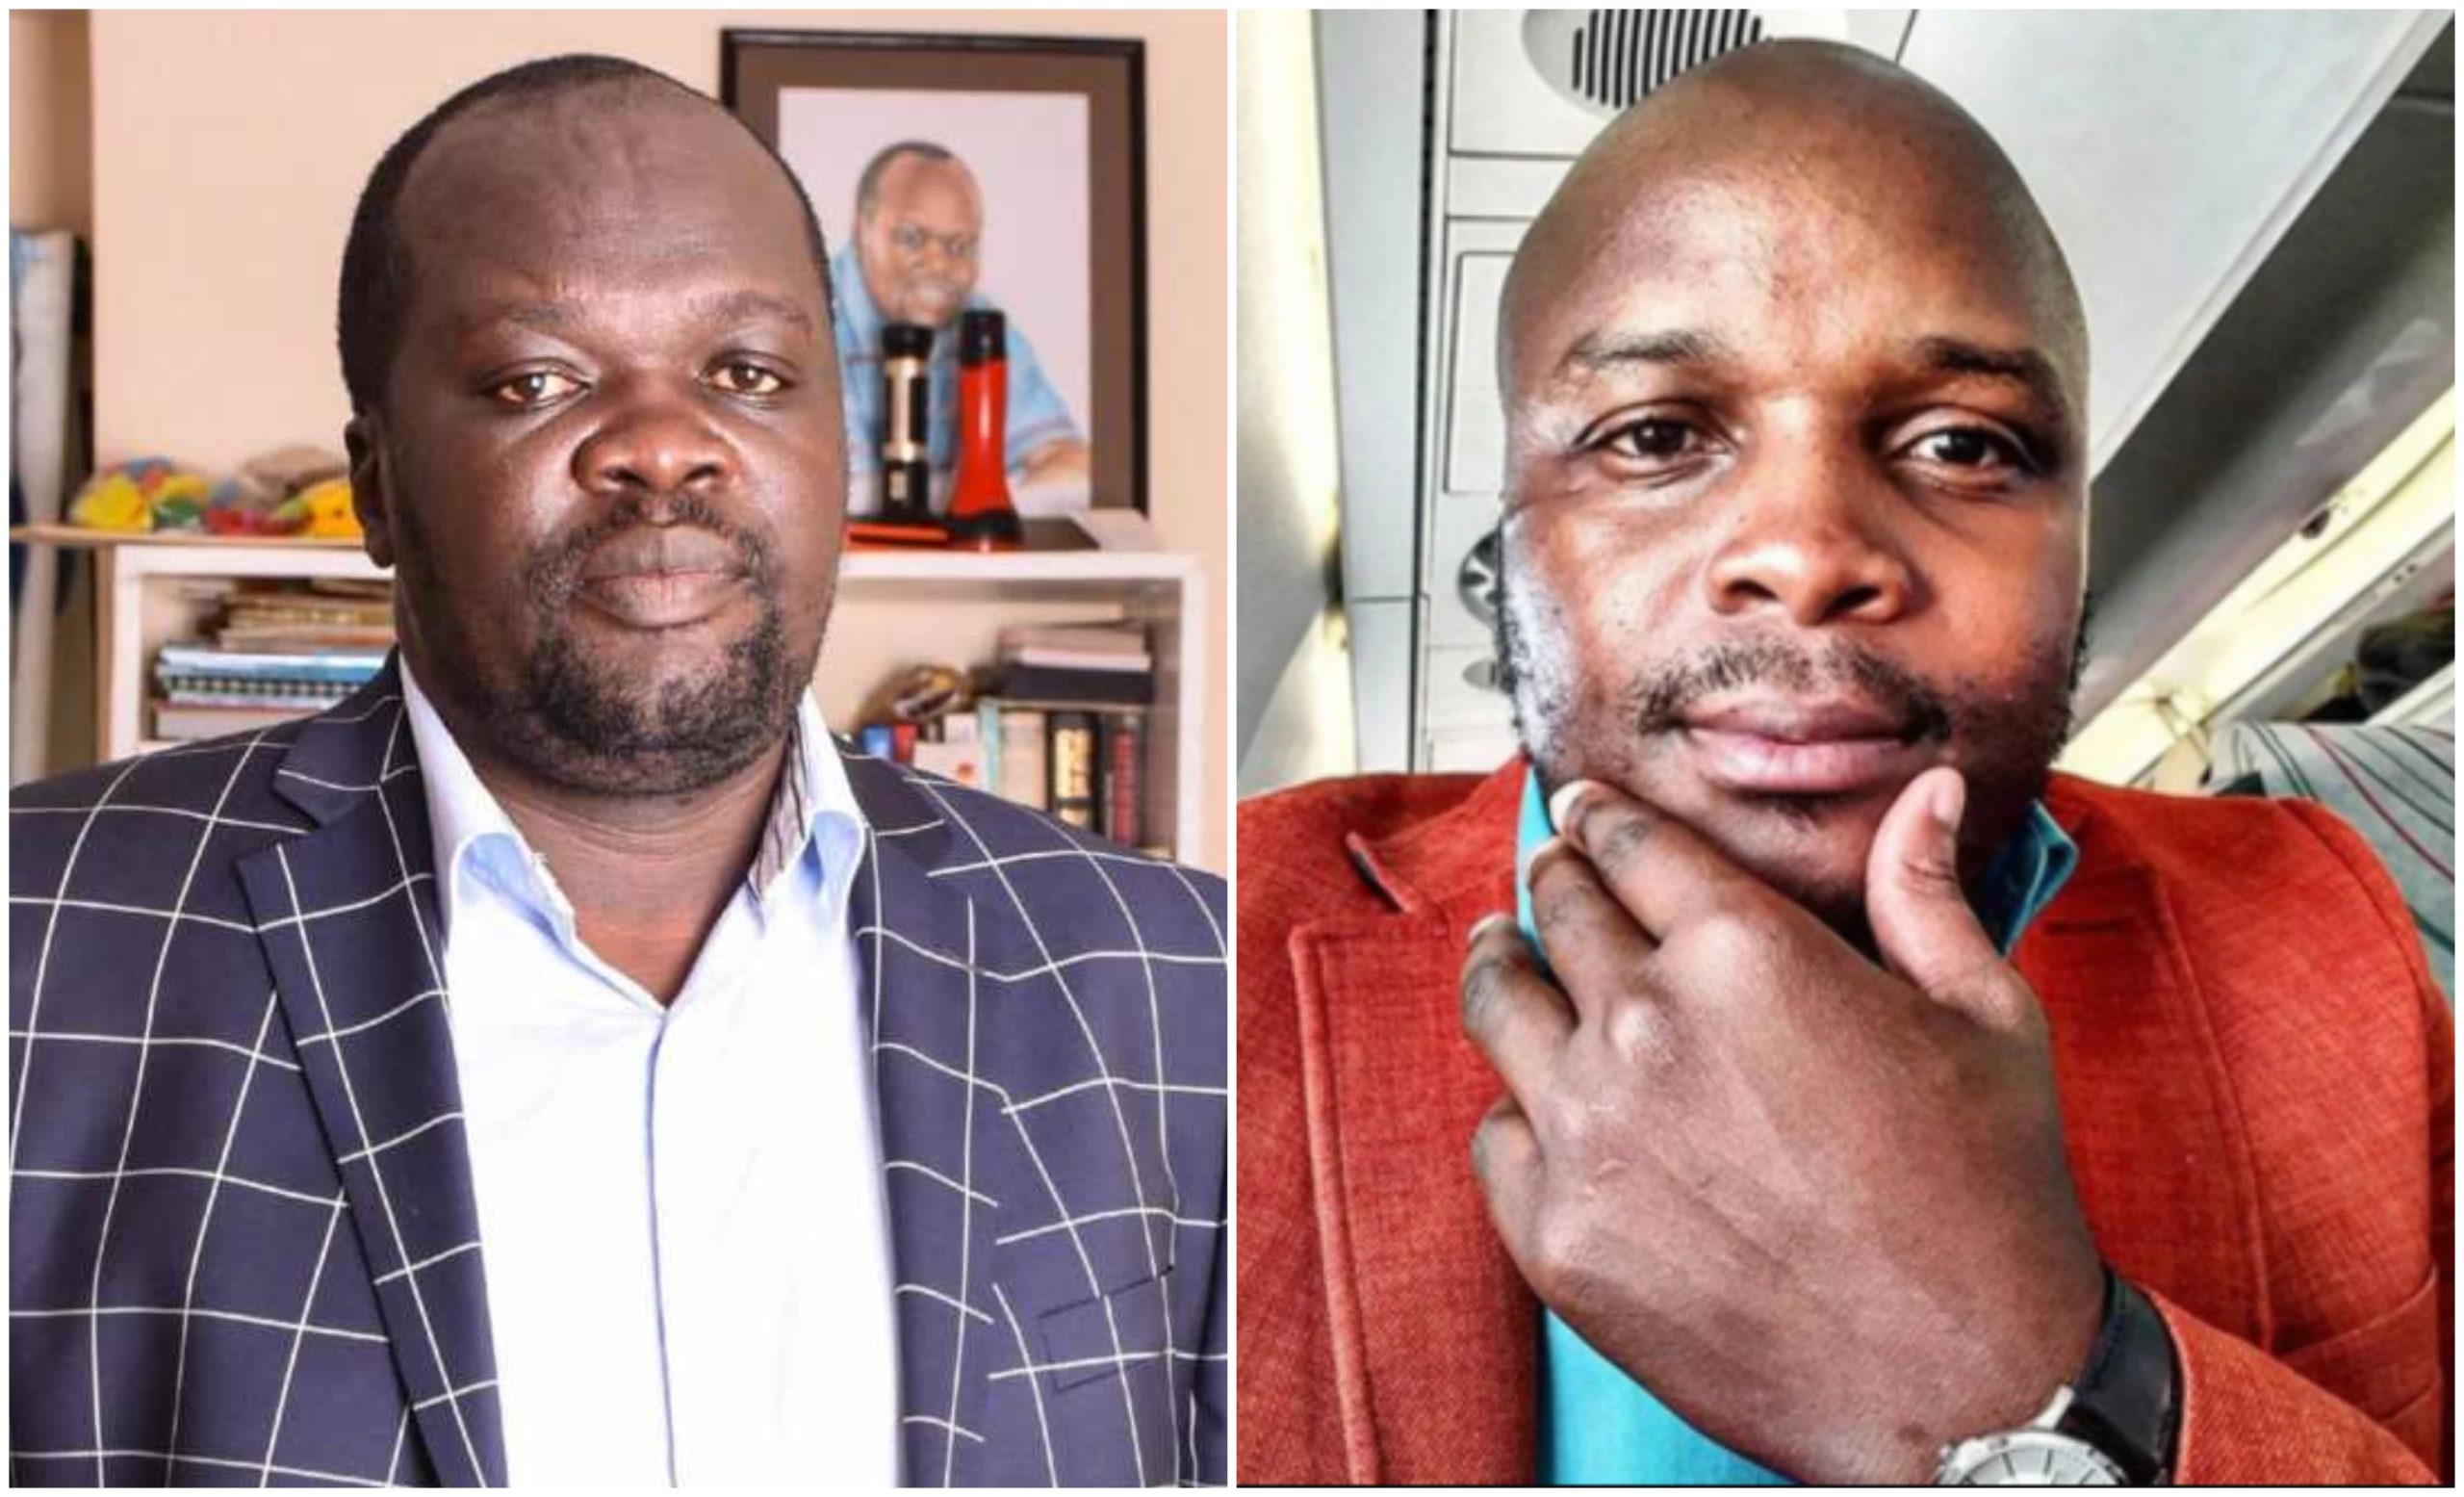 ¨We can no longer be friends!¨ Robert Alai cuts ties with members of the Boys Club